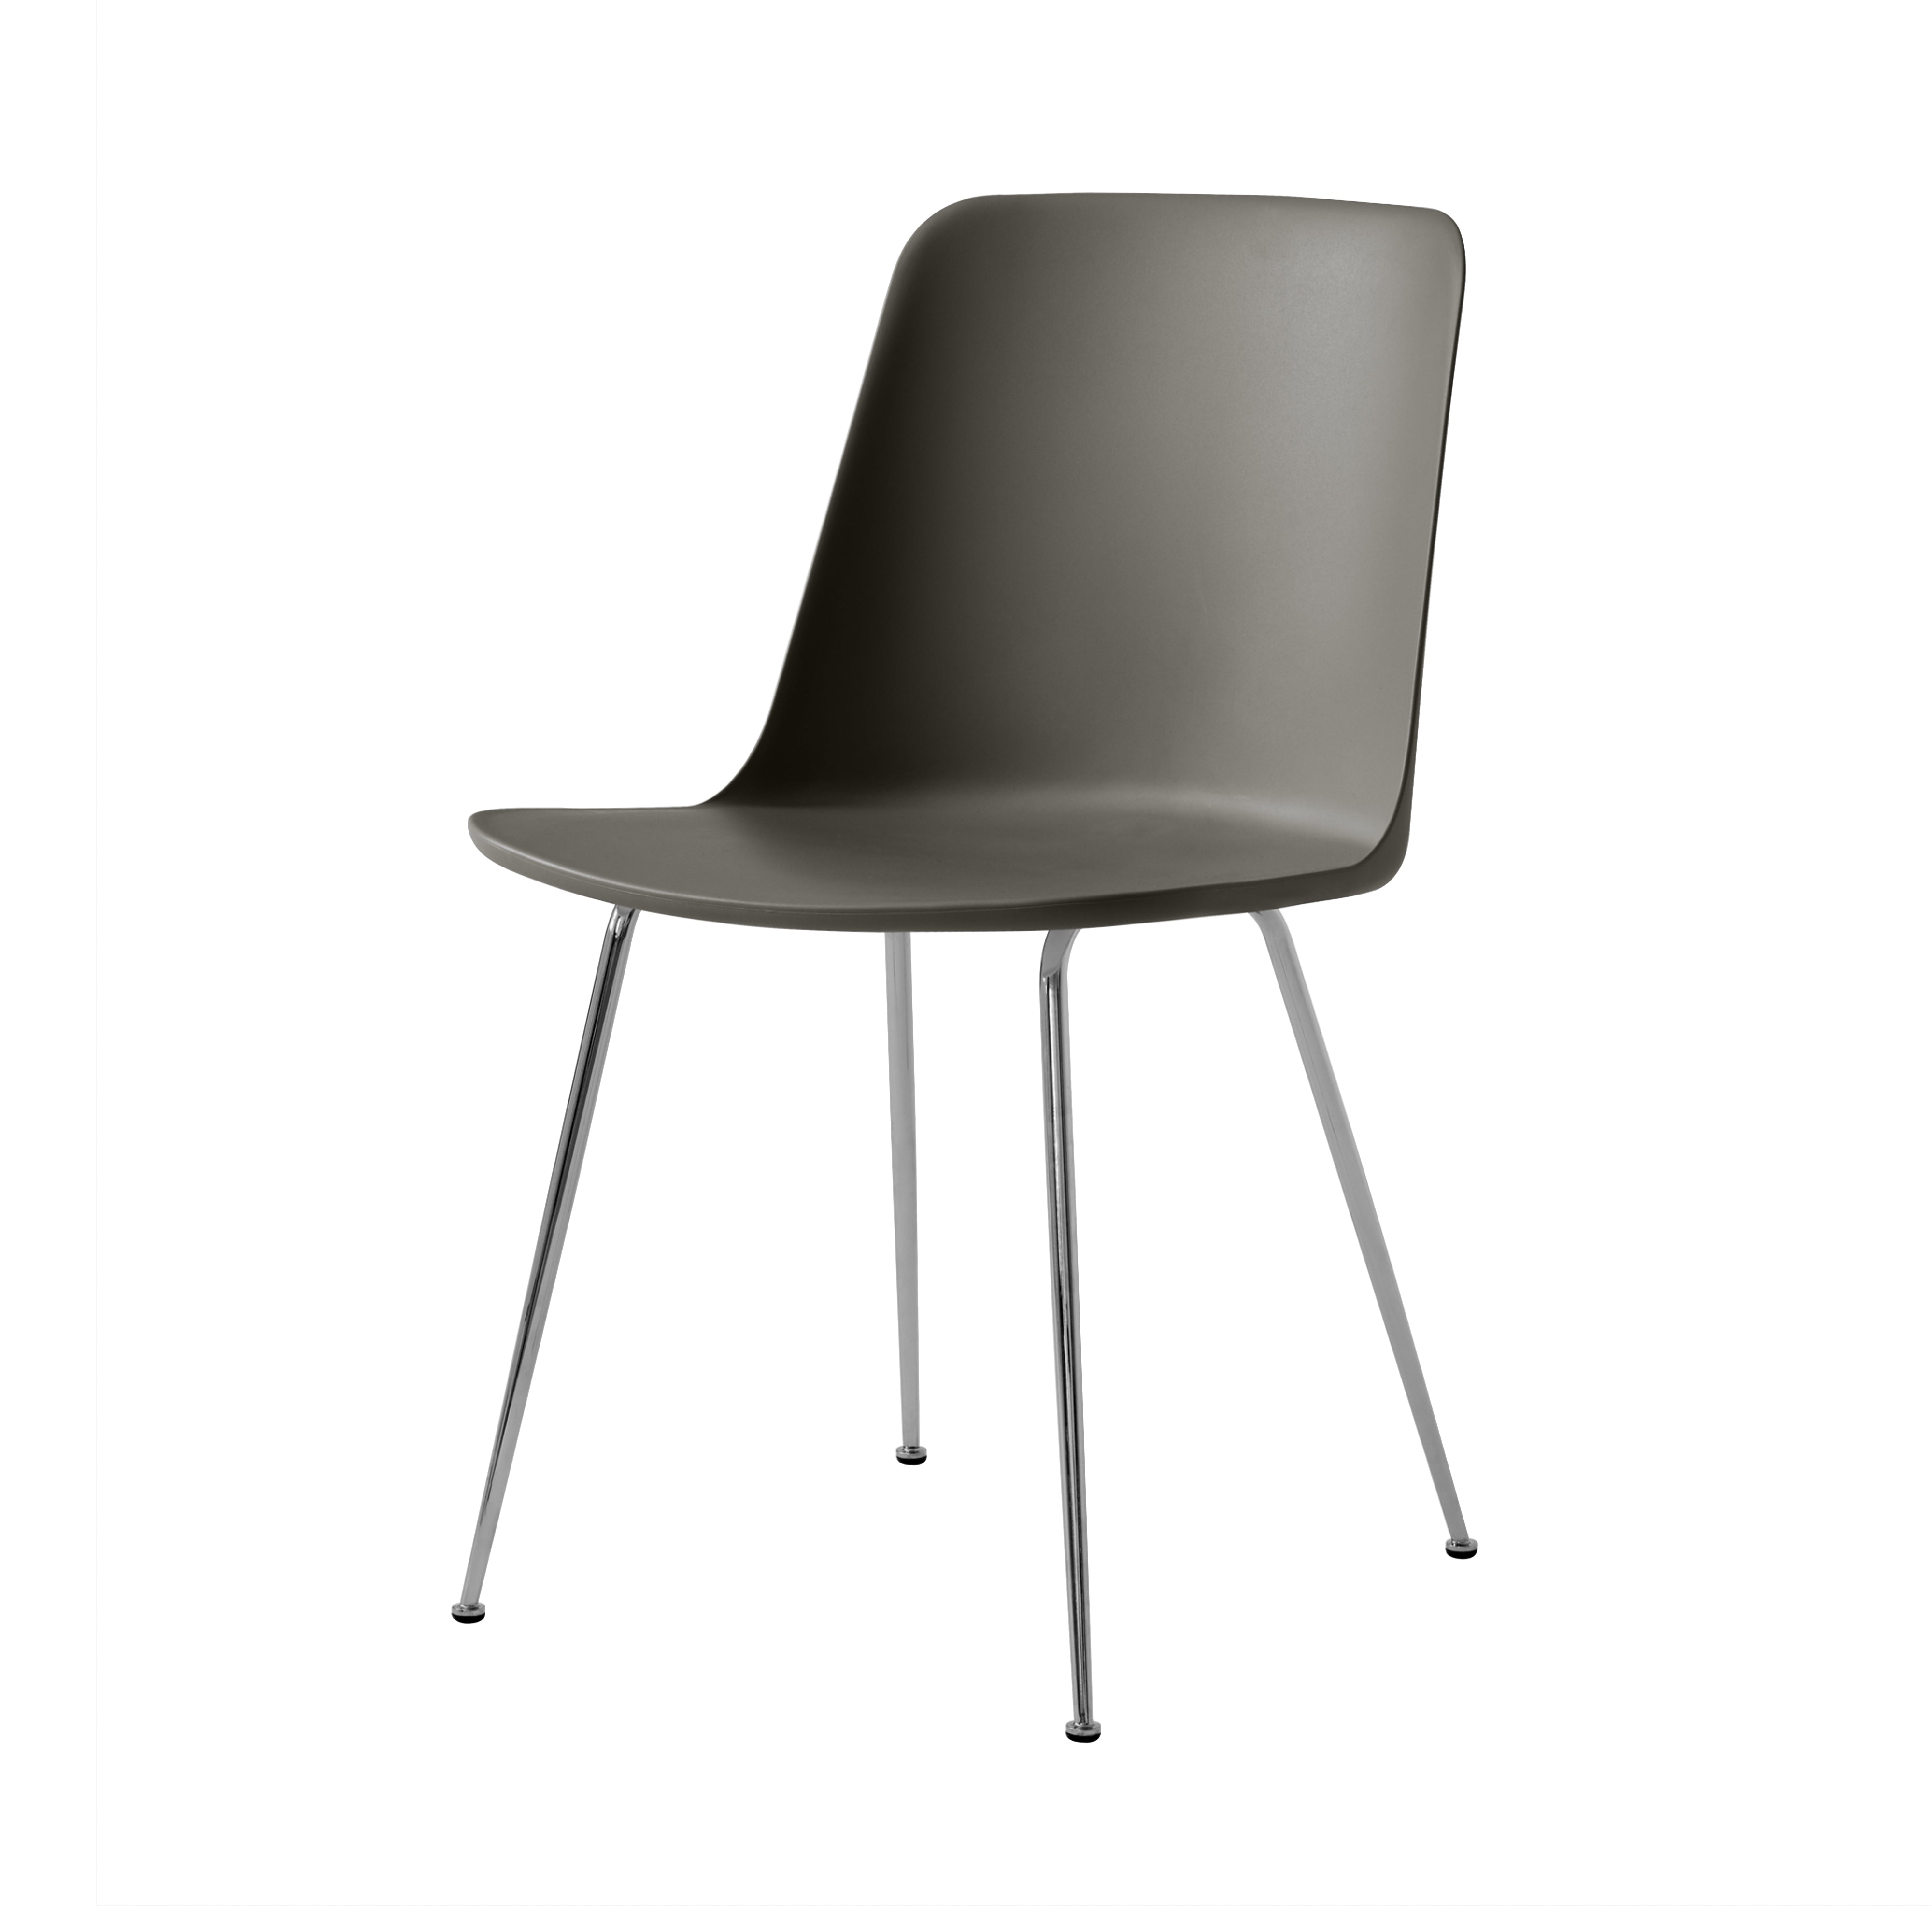 Rely Chair HW6: Stone Grey + Chrome